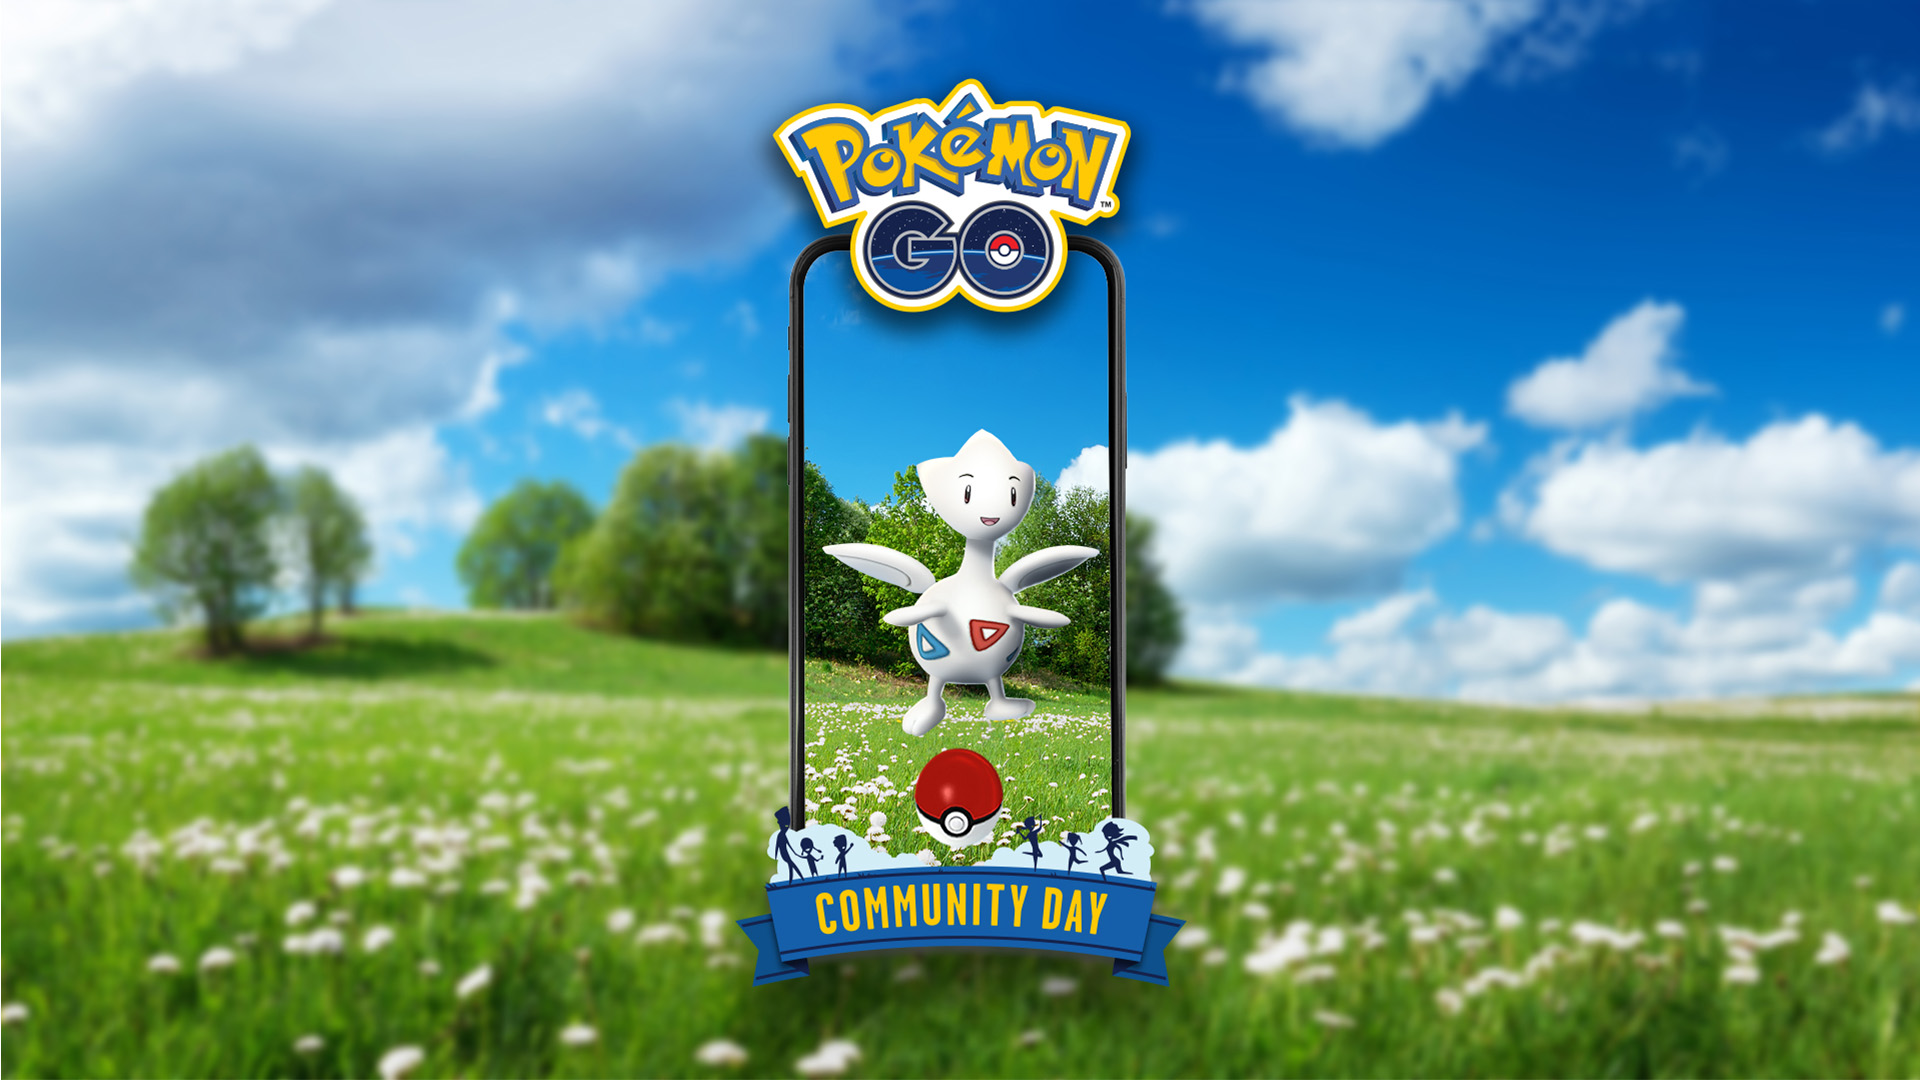 Togetic inside a smartphone